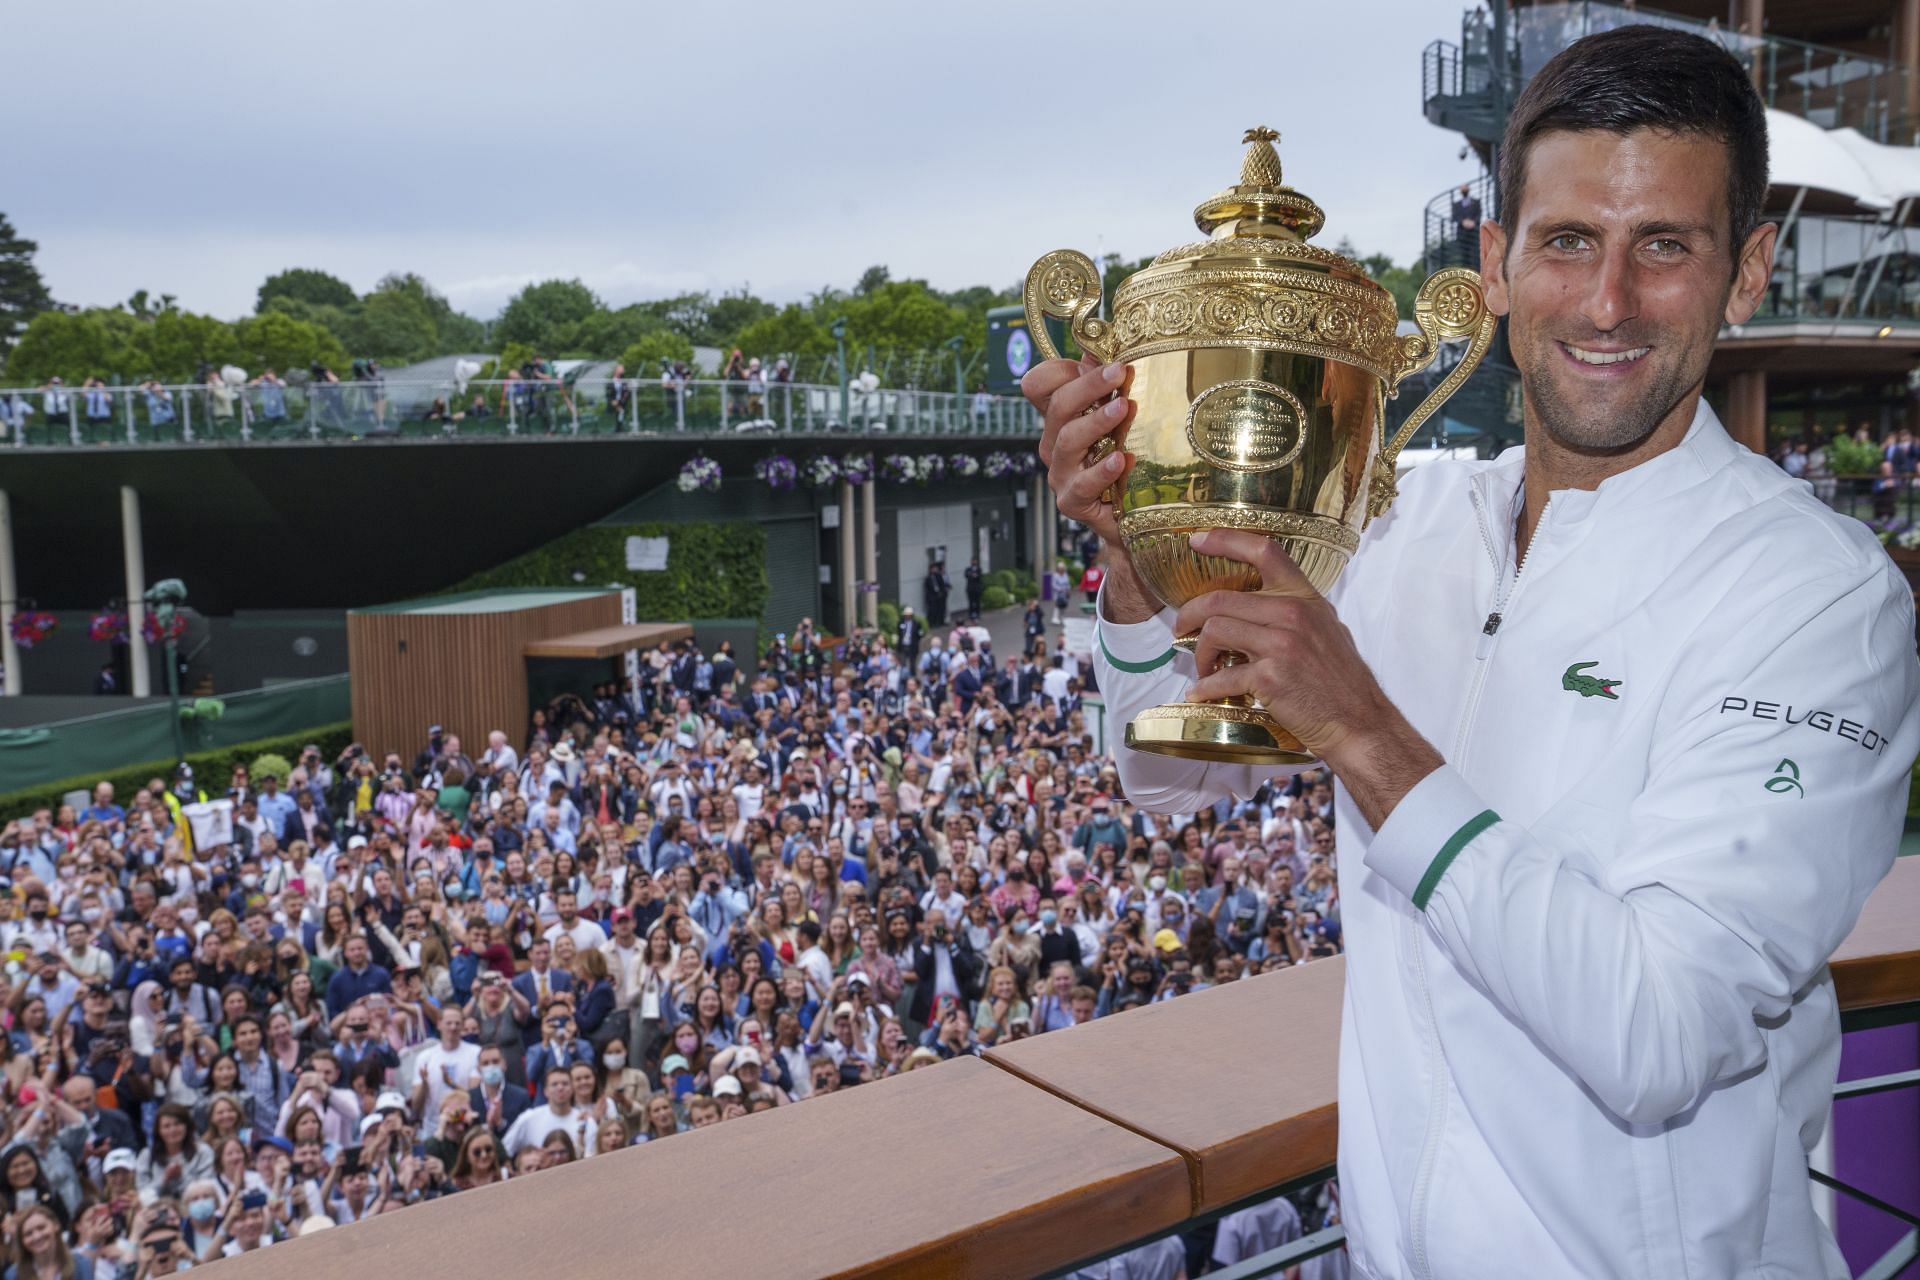 Novak Djokovic is the defending French Open and Wimbledon champion